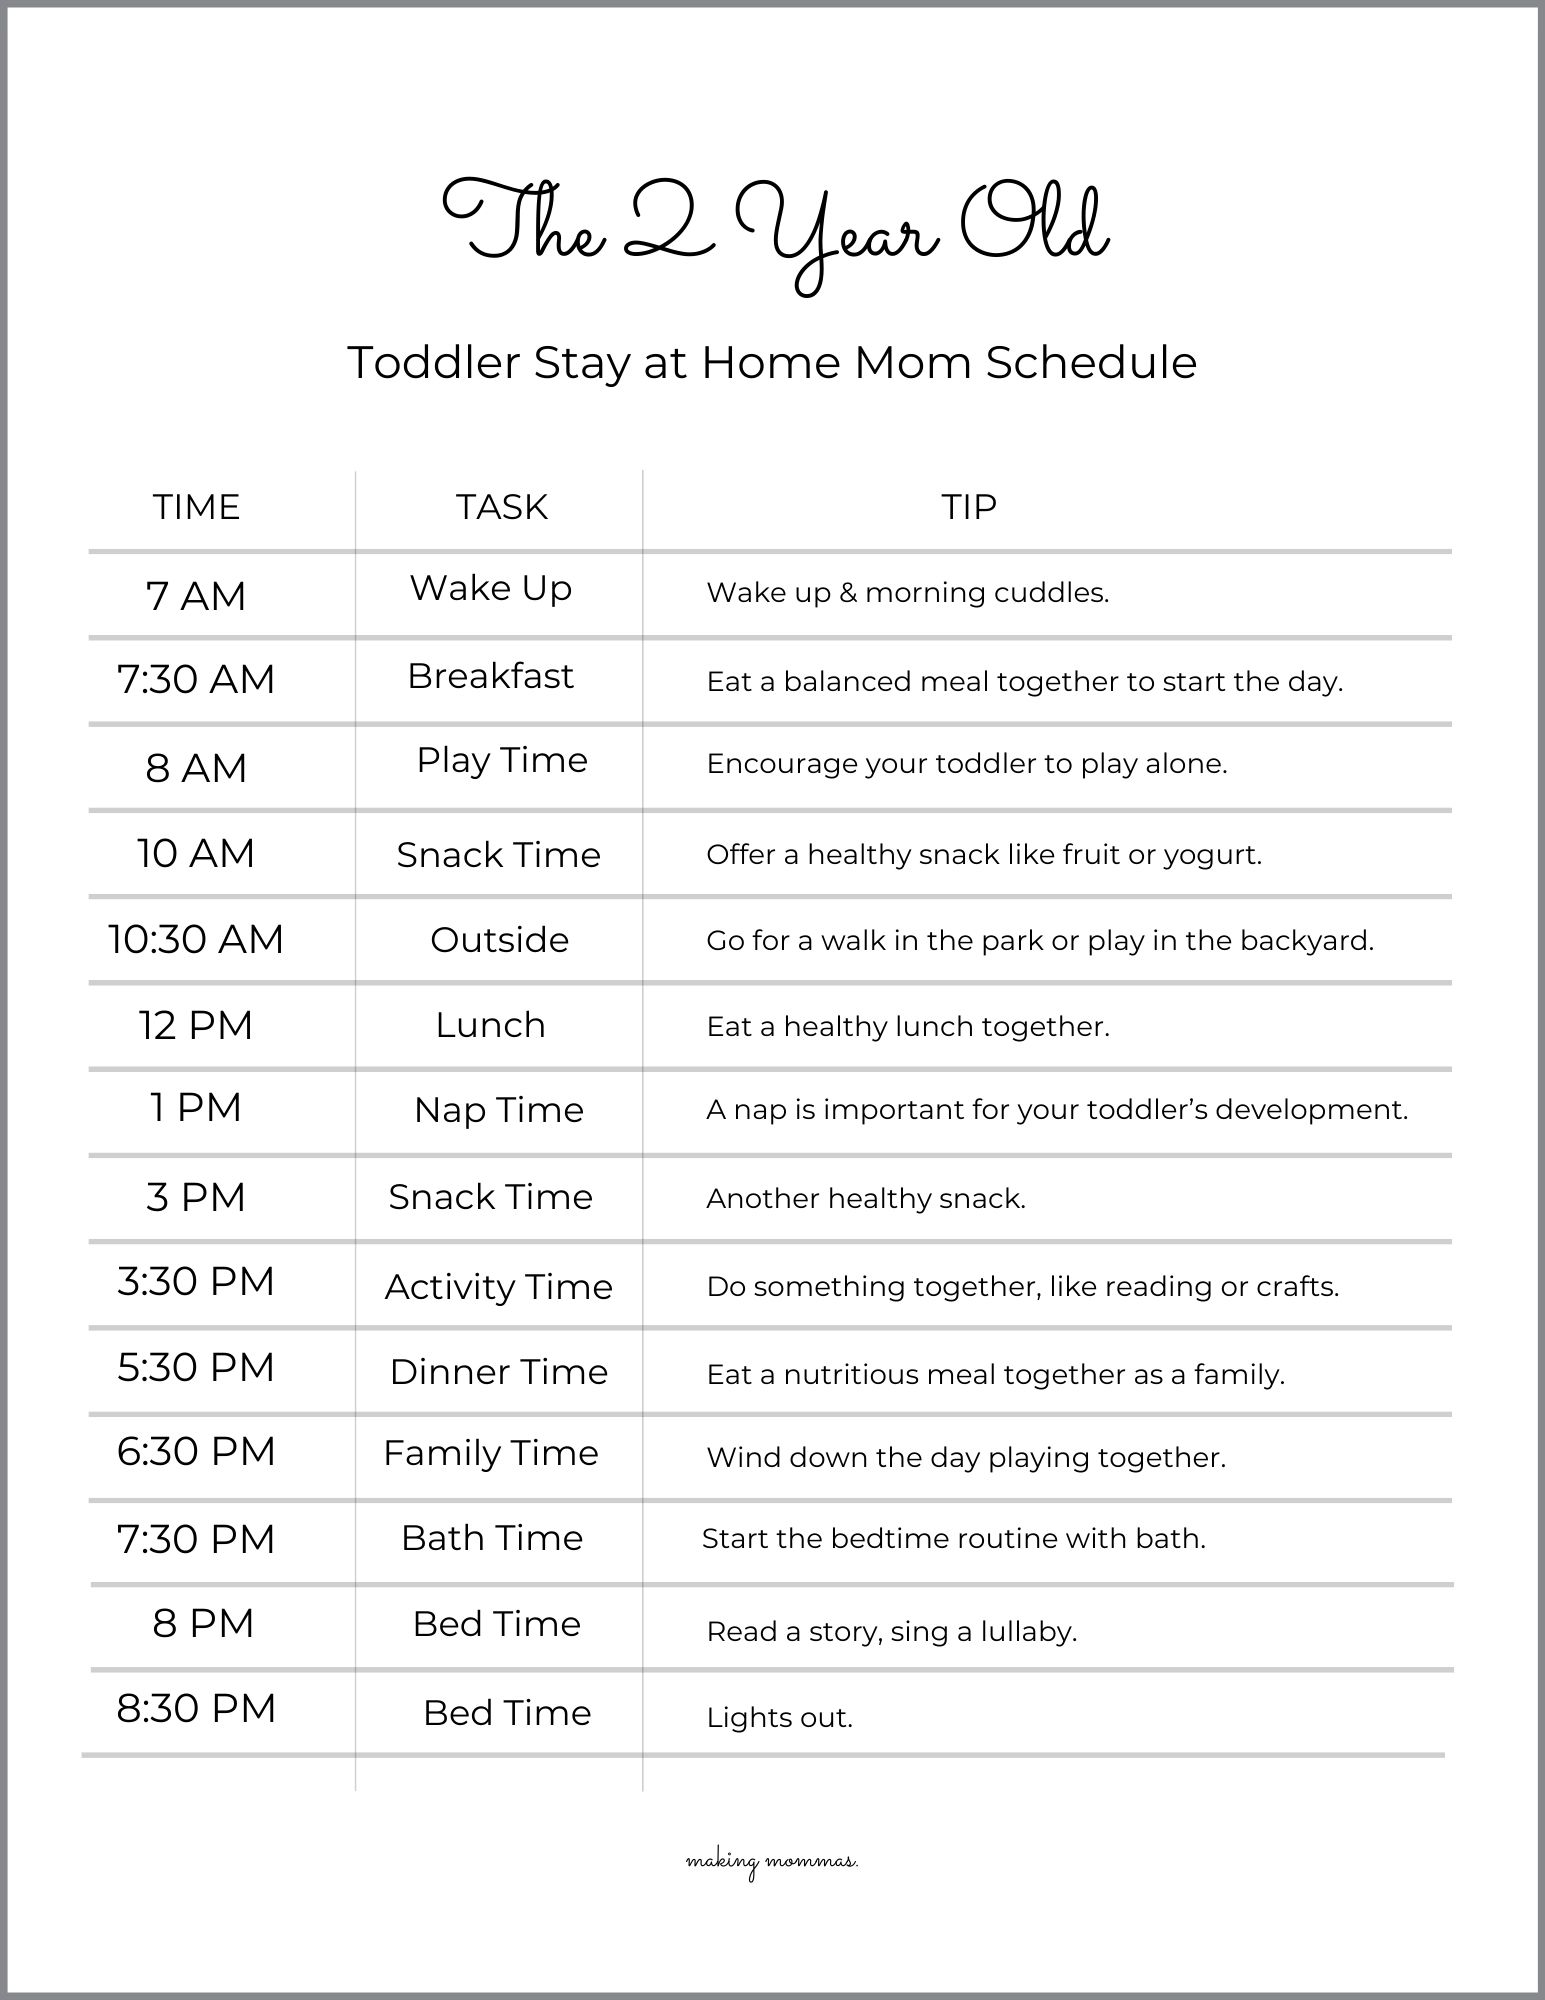 pin image of a sample 2 year old toddler stay at home mom schedule